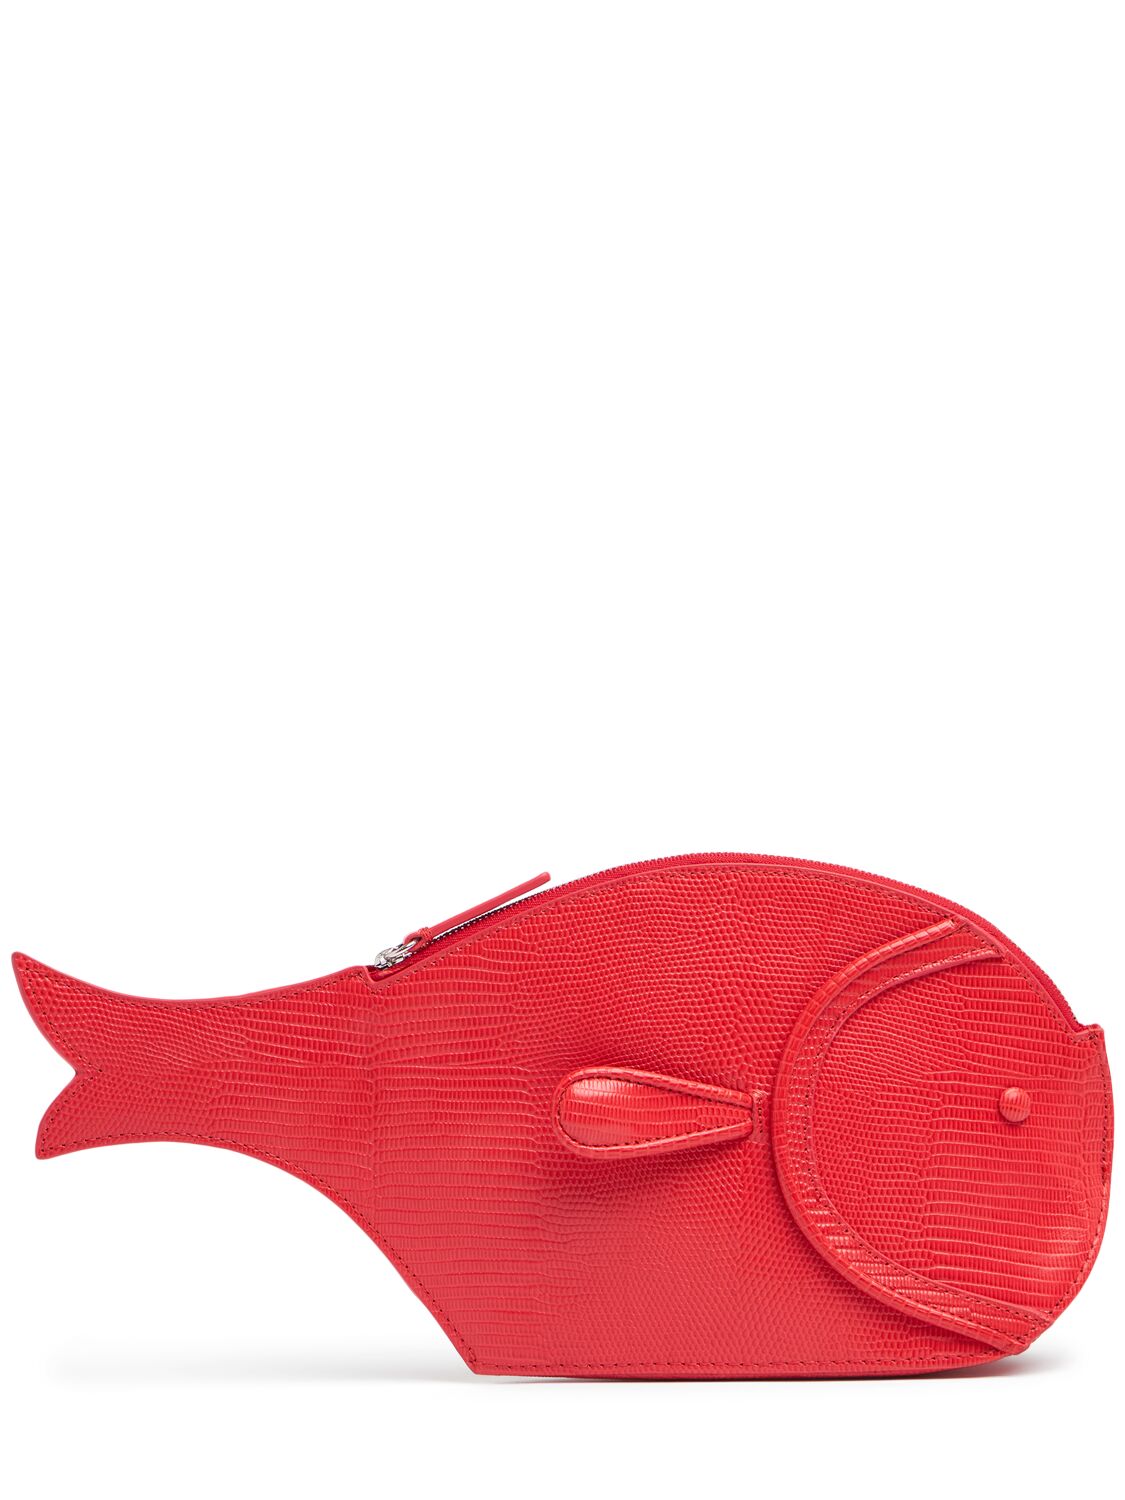 Staud Pesce Embossed Leather Clutch In Red Rose